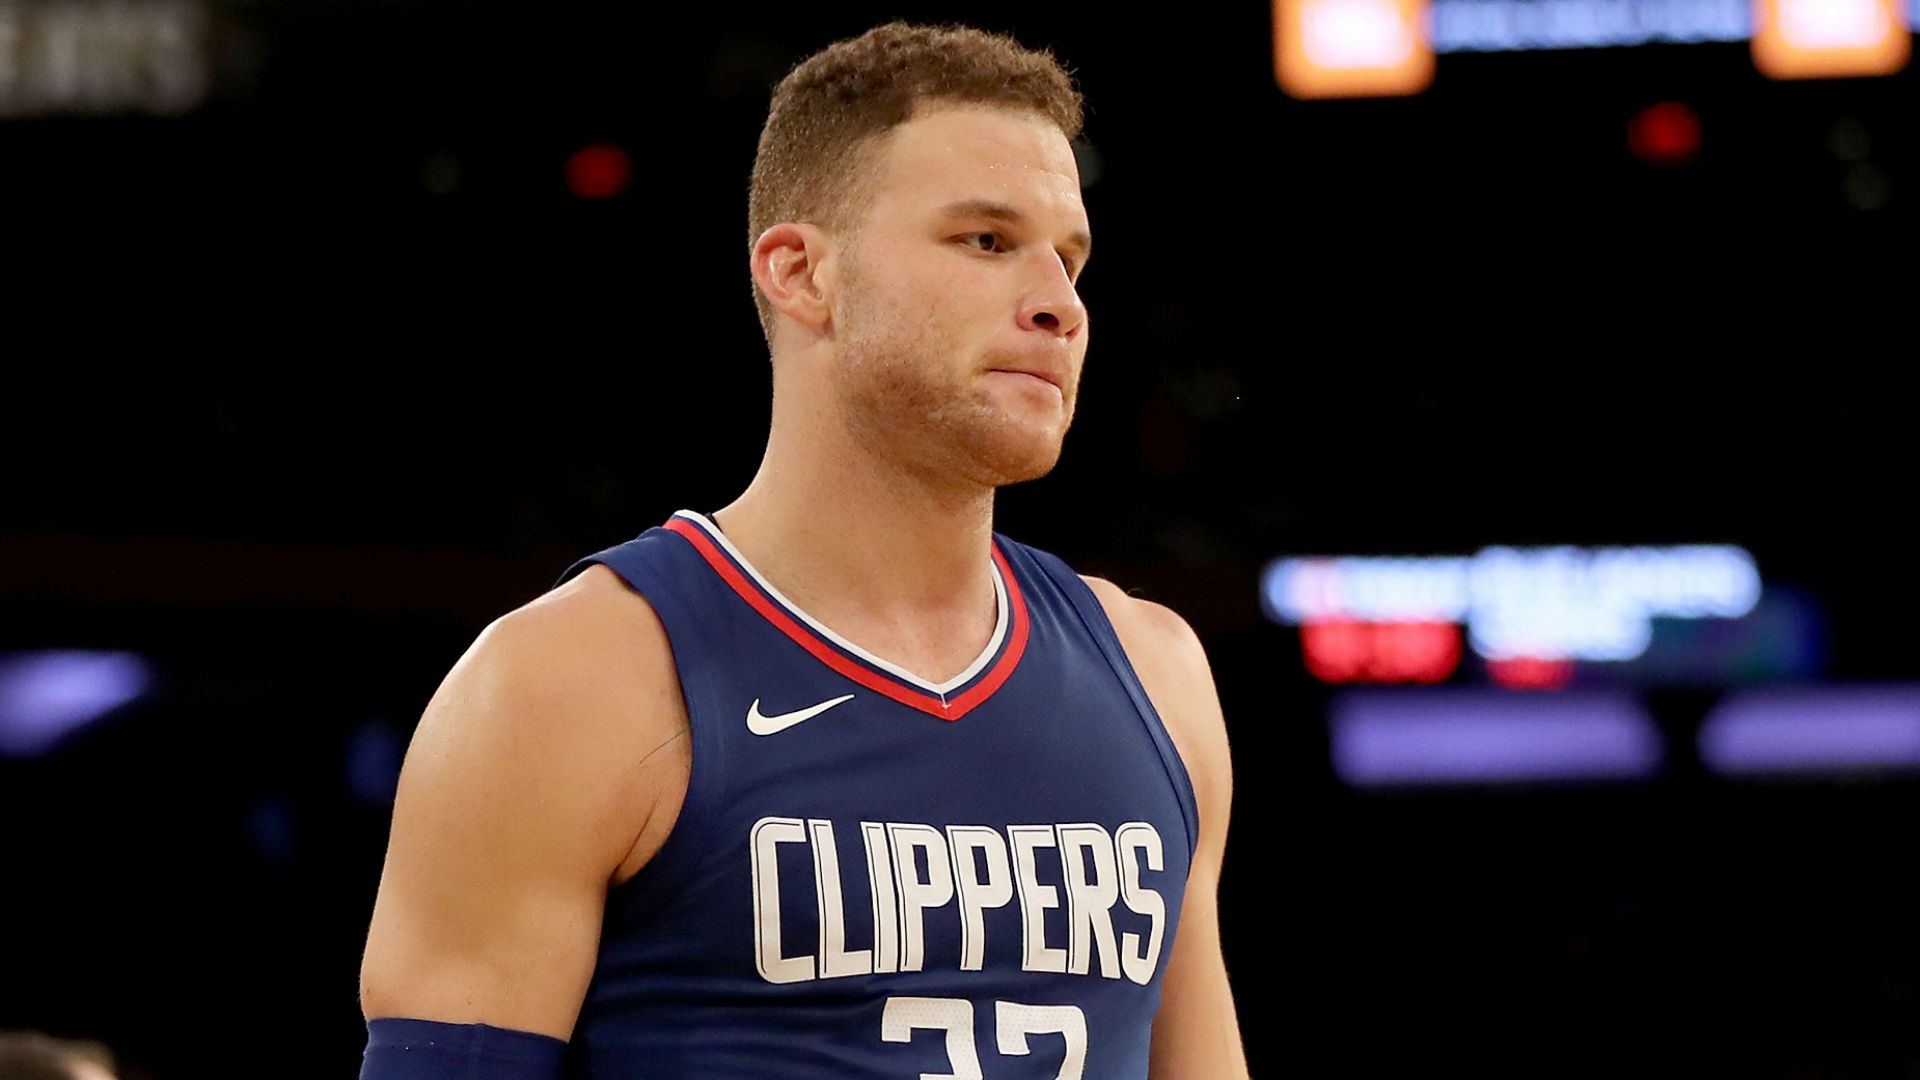 Clippers Star Blake Griffin Suffers Serious Concussion